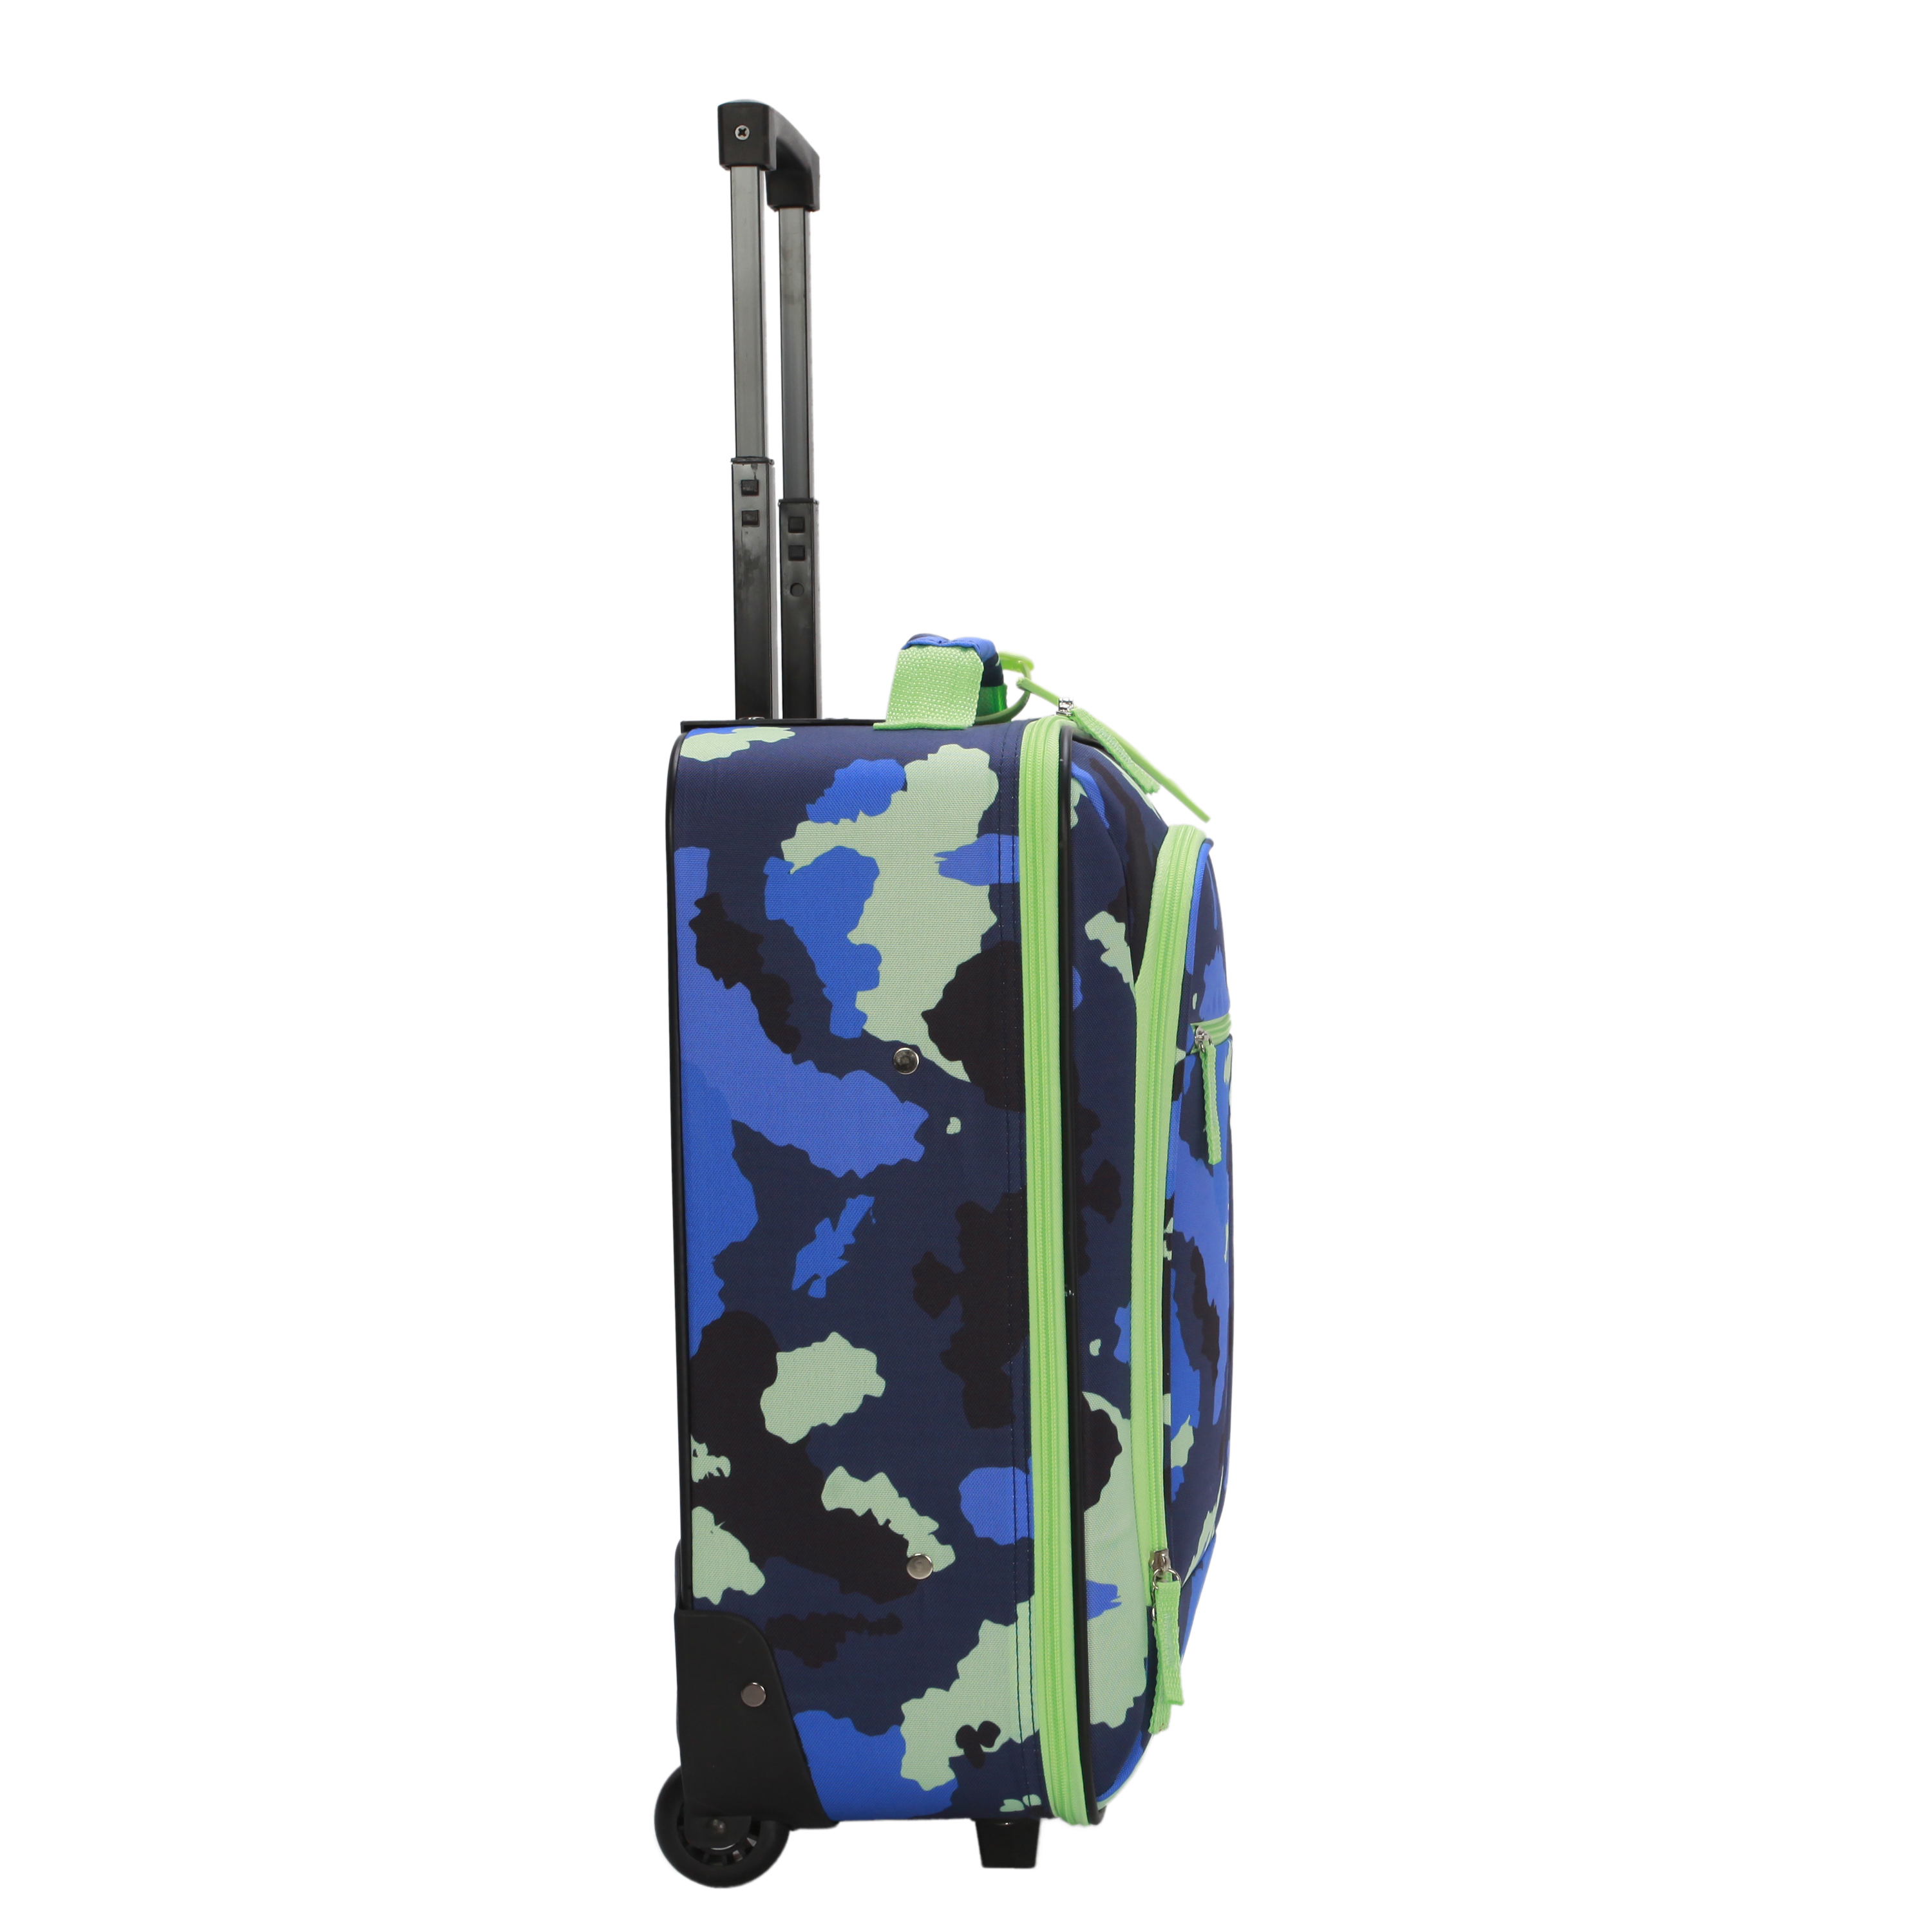 CRCKT 4 Piece 18-inch Soft side Carry-on Kids Luggage Set, Blue Camo - image 5 of 23